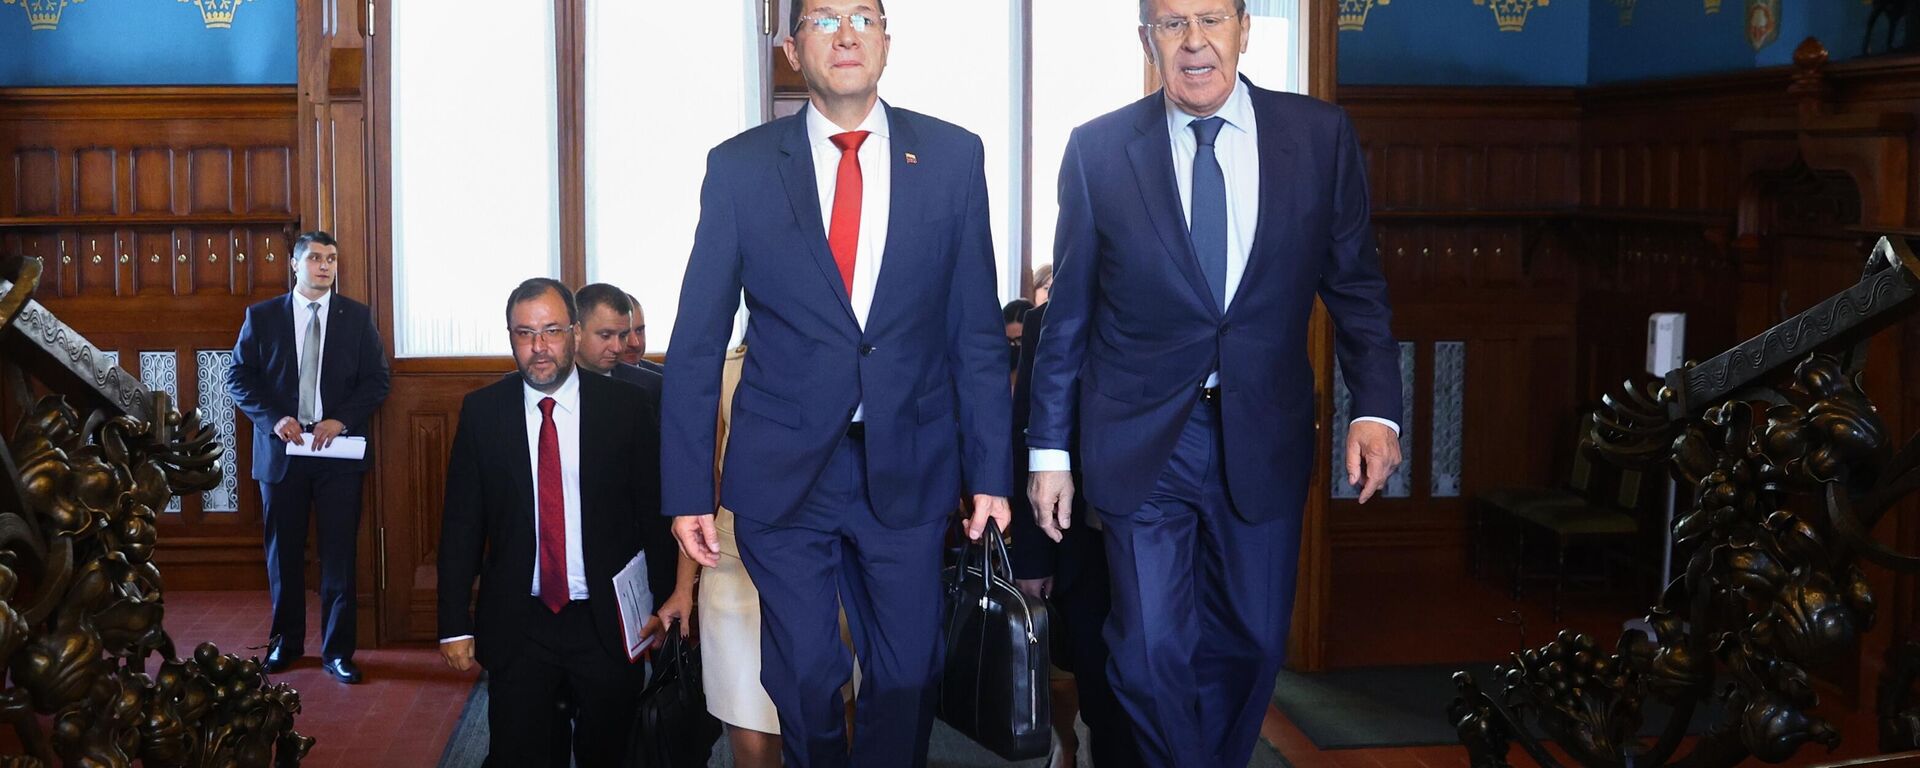 Russian Foreign Minister Sergei Lavrov and his Venezuelan counterpart Carlos Faria meet in Moscow on Monday, July 4, 2022. - Sputnik International, 1920, 04.07.2022